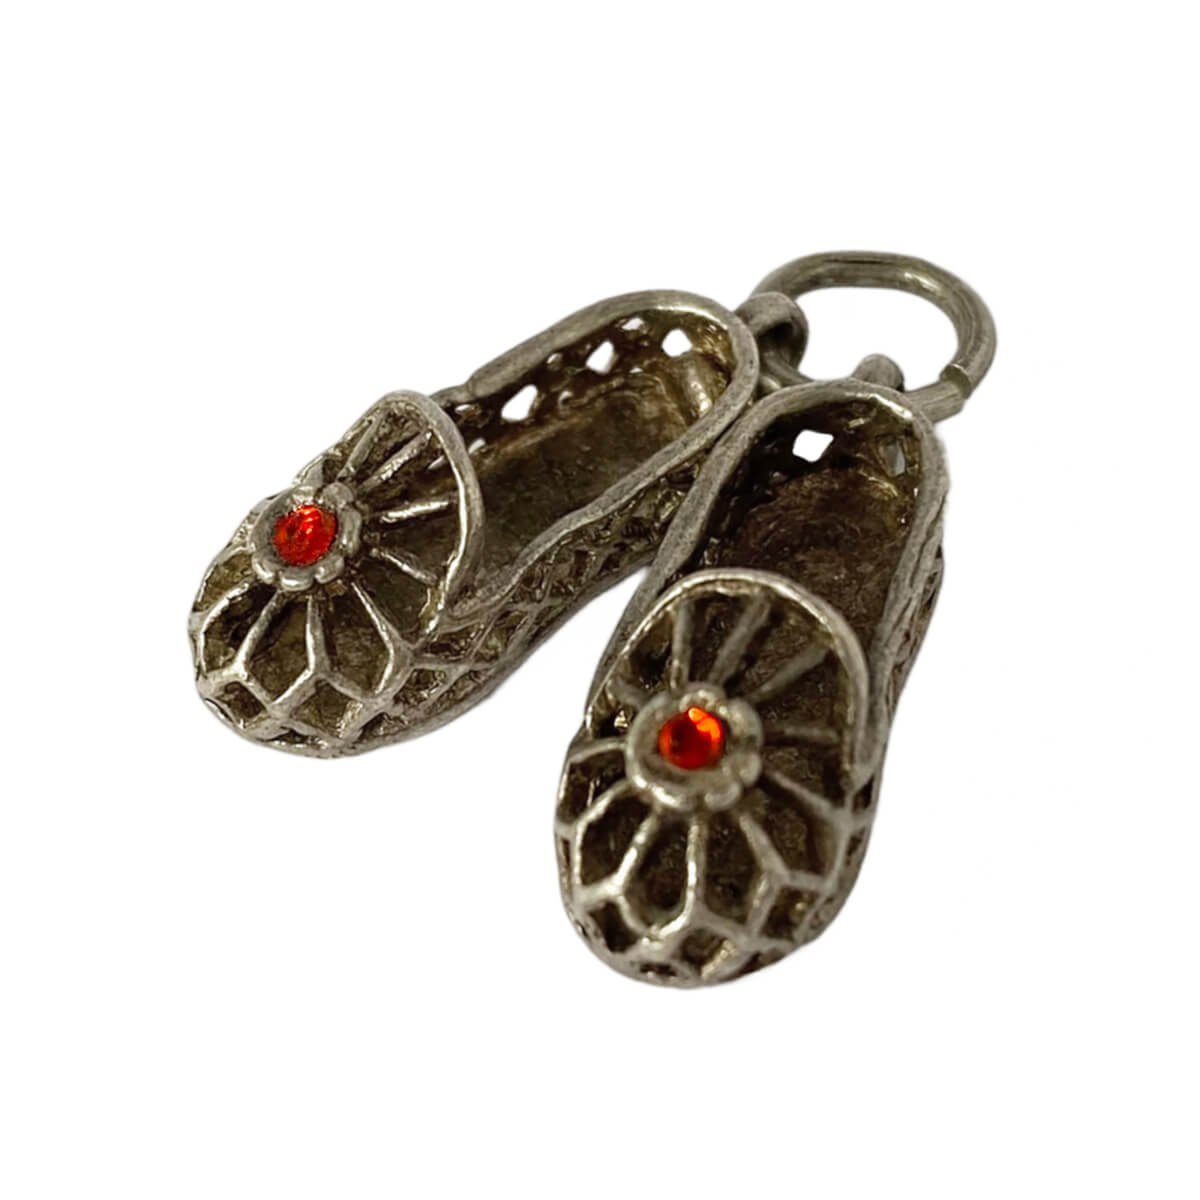 Vintage slippers charm sterling silver and red crystal pendant from Charmarama